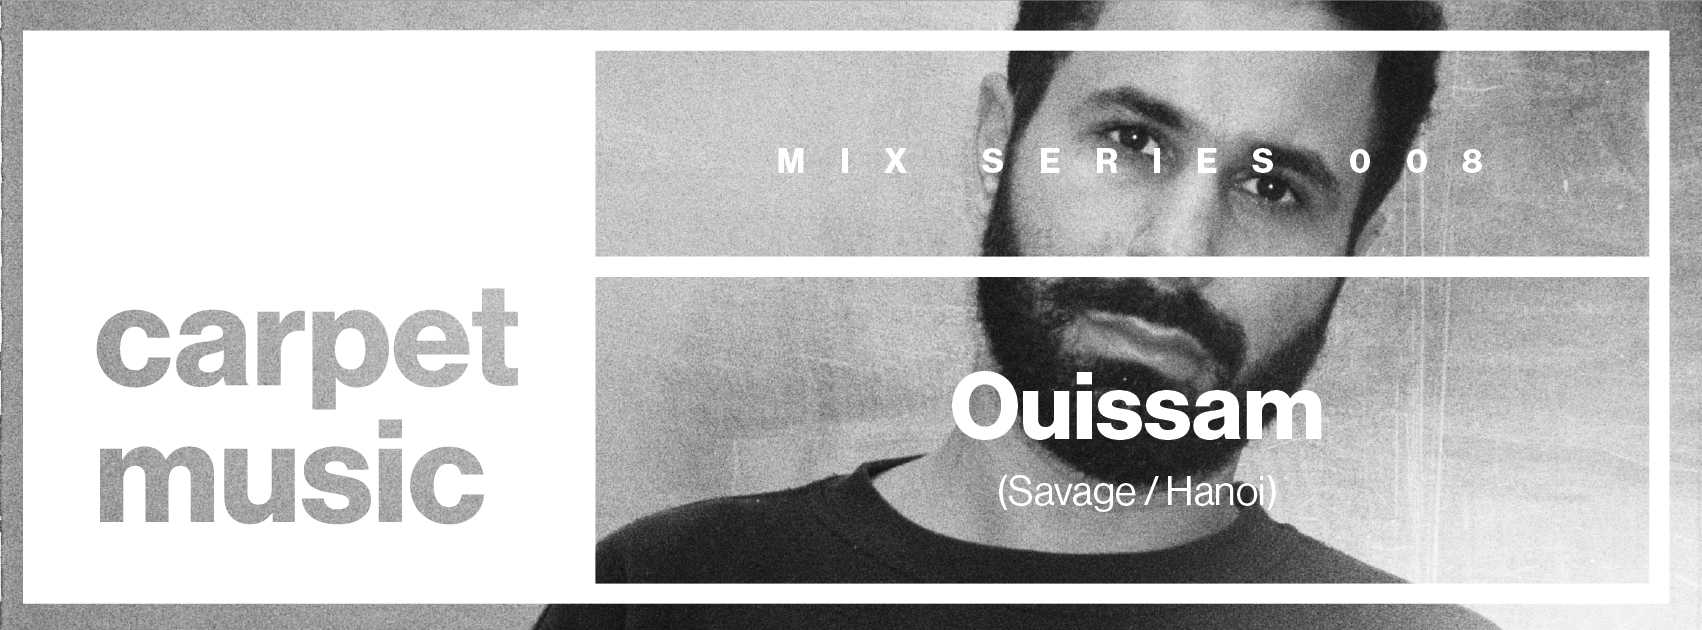 CM_PODCAST008_Ouissam-02